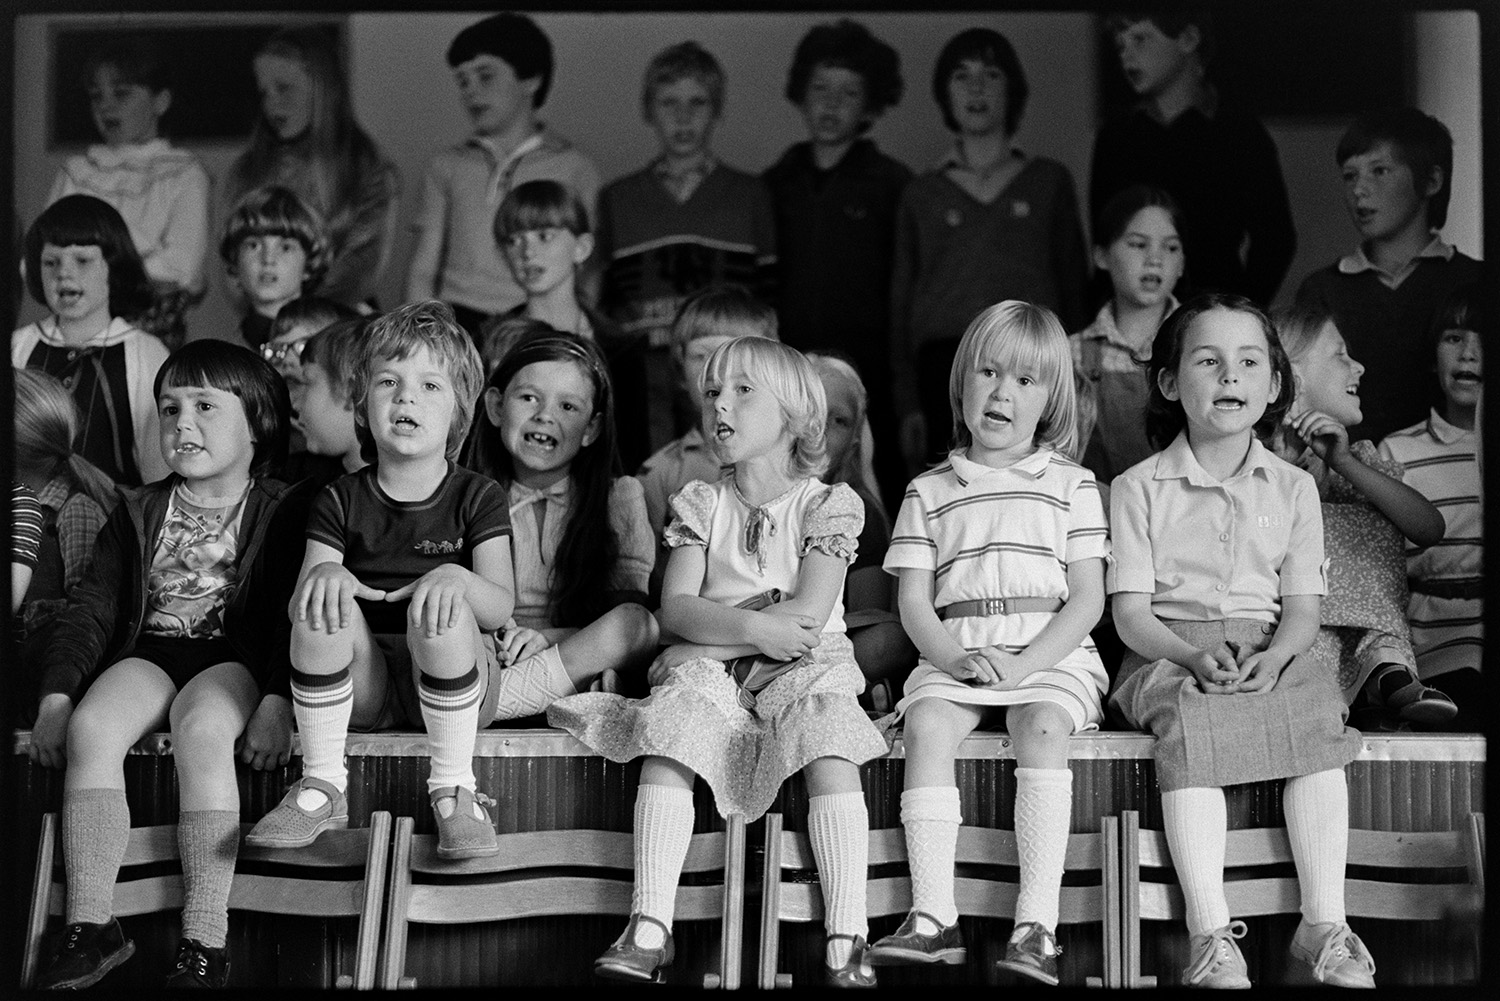 Schoolchildren giving concert in village hall, headmistress and children singing. 
[Schoolchildren singing in a concert or event in Dolton Village Hall. They are sitting on the stage in the hall.]